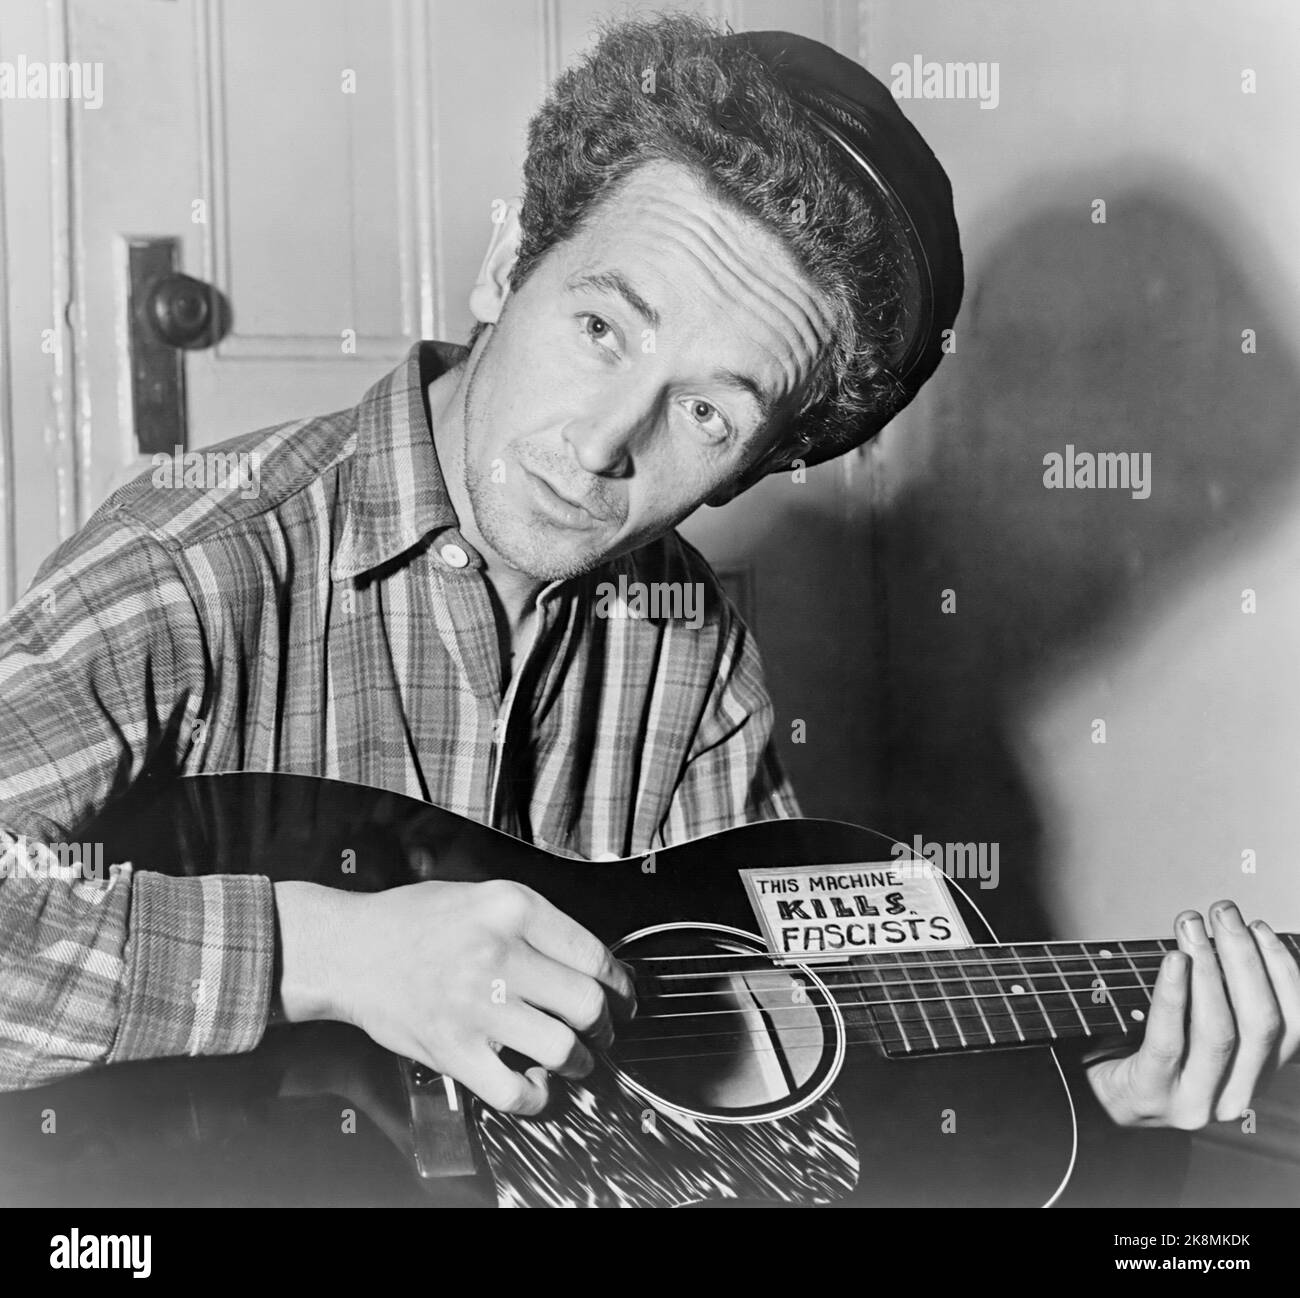 Woody Guthrie - Iconic photograph by Al Aumuller of the folk singer with guitar claiming 'This Machine Kills Fascists' - 1943 Stock Photo